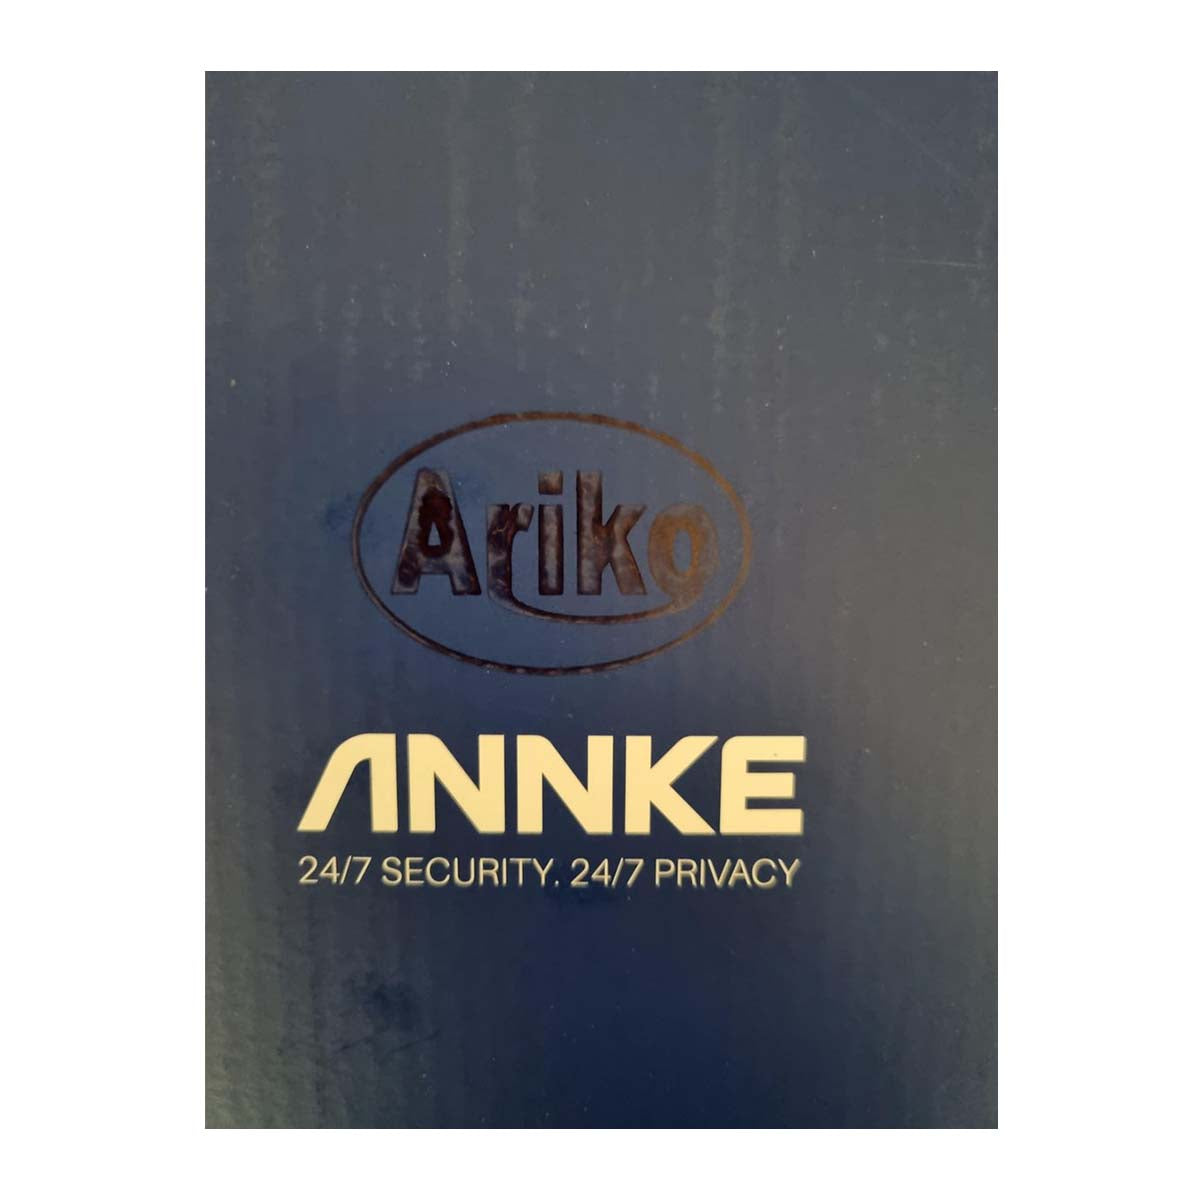 Ariko Annke Wireless 3MP camera security system 10 pouces monitor 2TB HD/live internet - 4 caméras sans fil - Plug and play